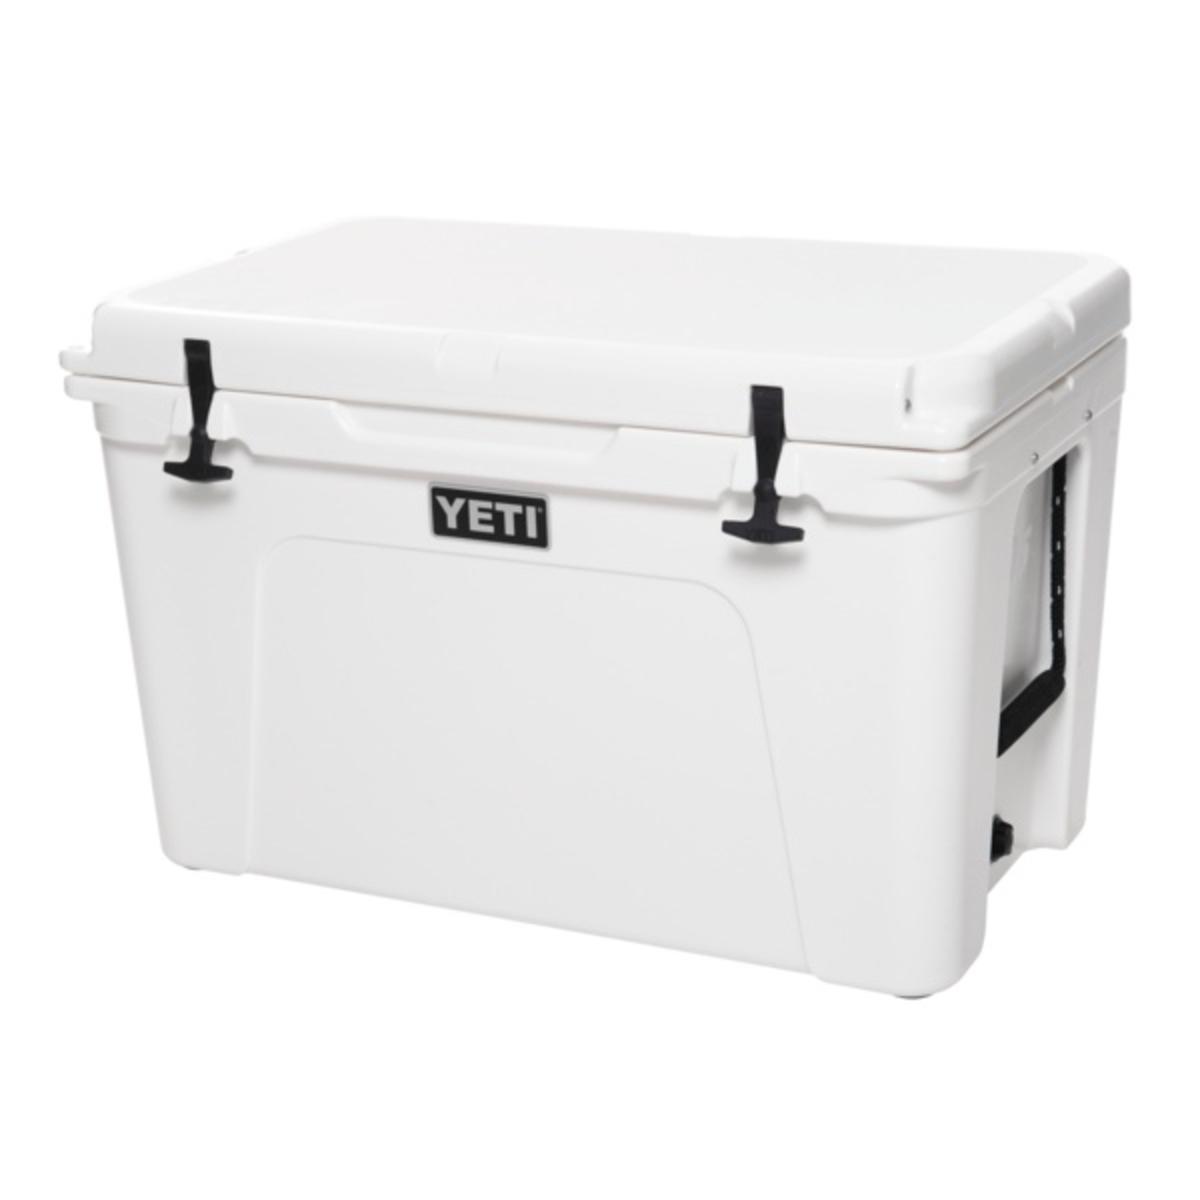 YETI® TUNDRA® 105 HARD COOLER front side closed view